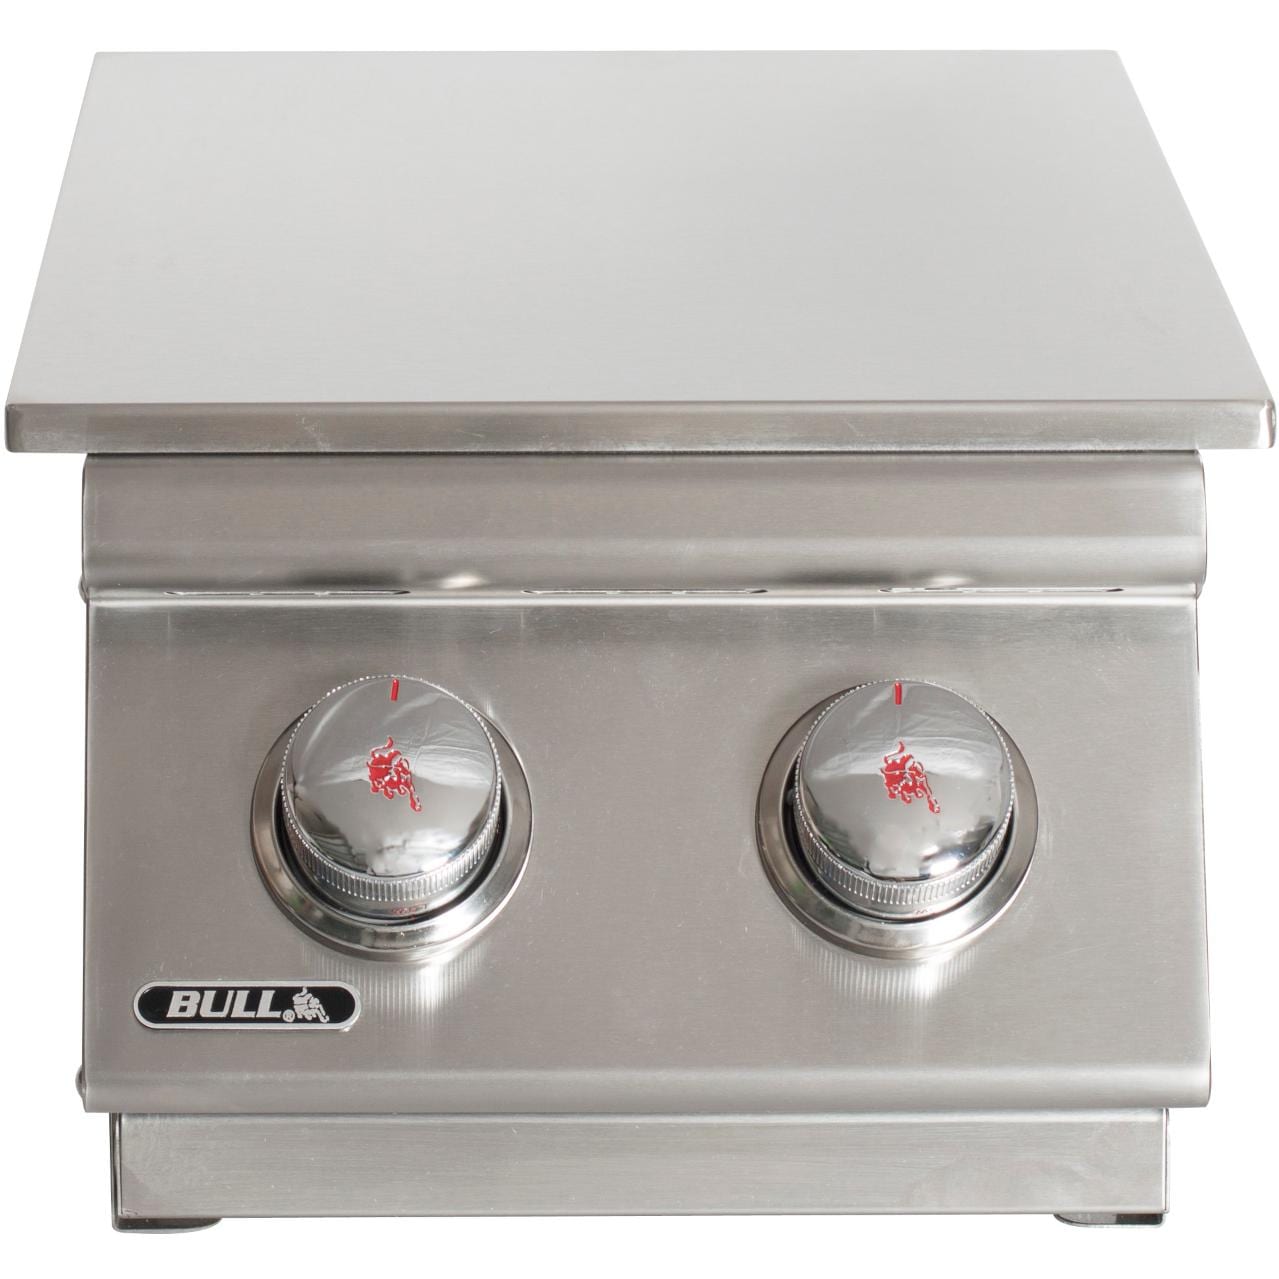 Bull Outdoor Products Stainless Steel 22,000 BTUs Slide-In Double Side Burner - image 3 of 5